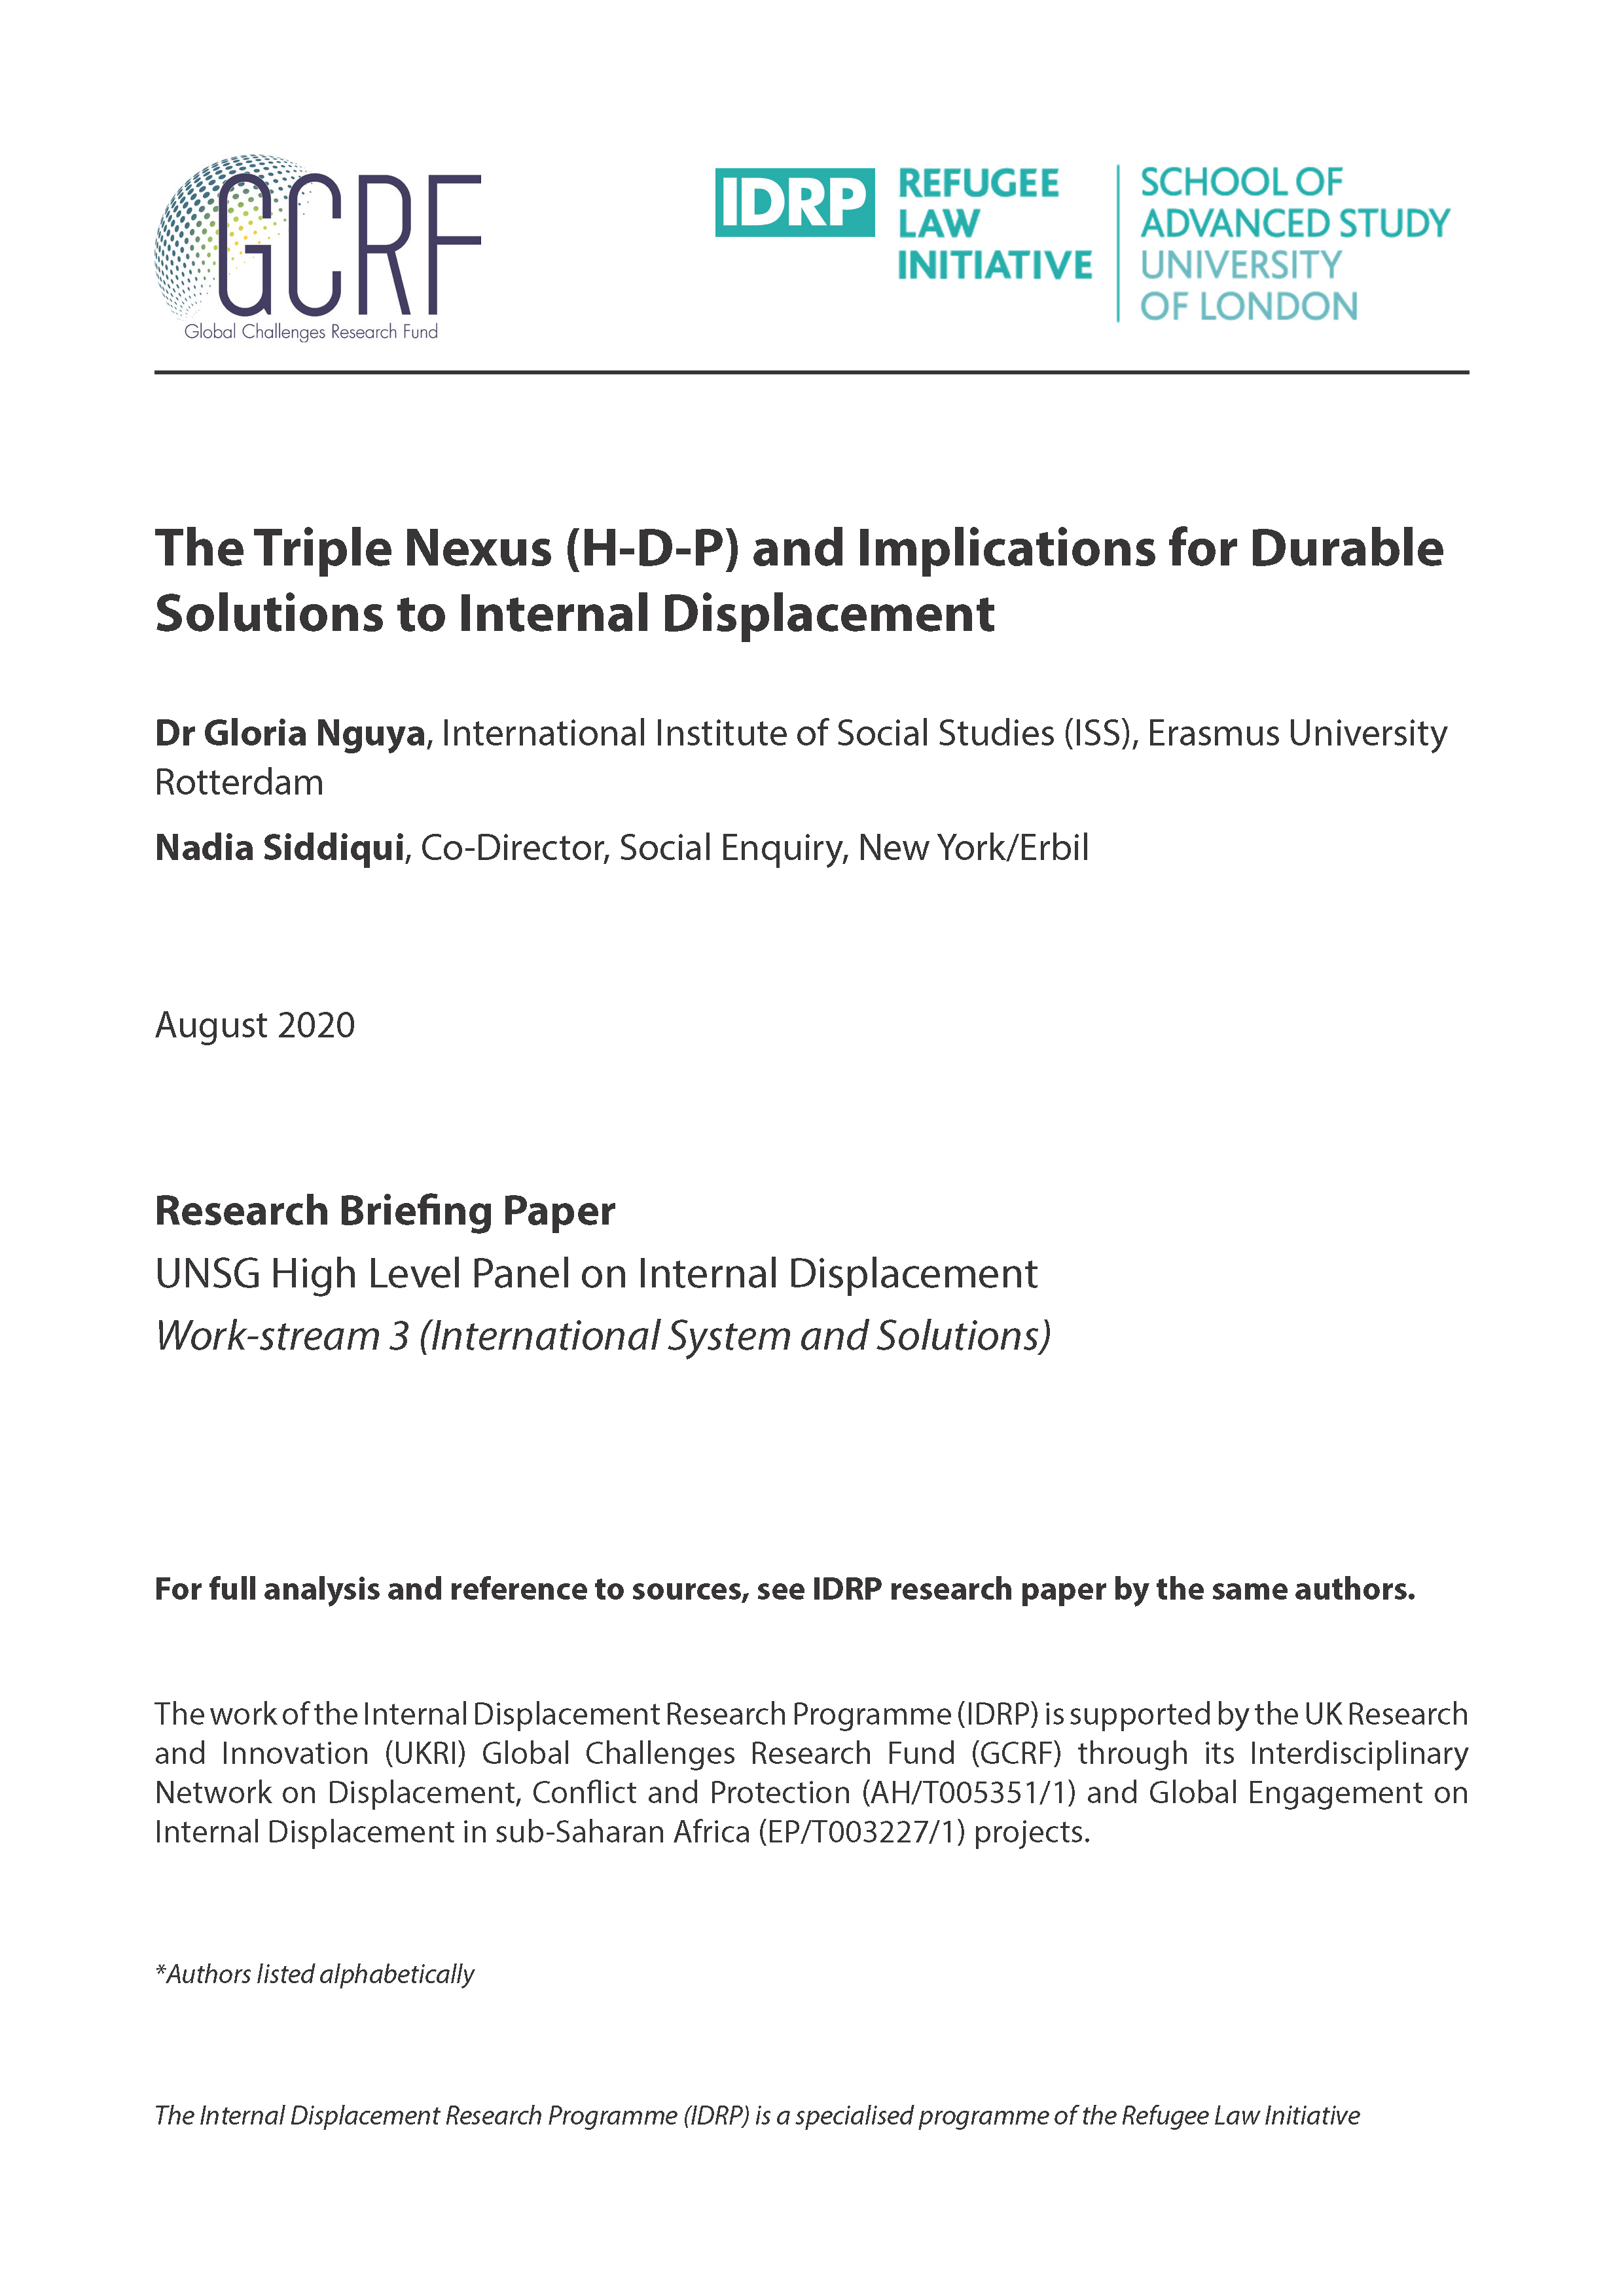 Cover page for The Triple Nexus and Implications for Durable Solutions to Internal Displacement